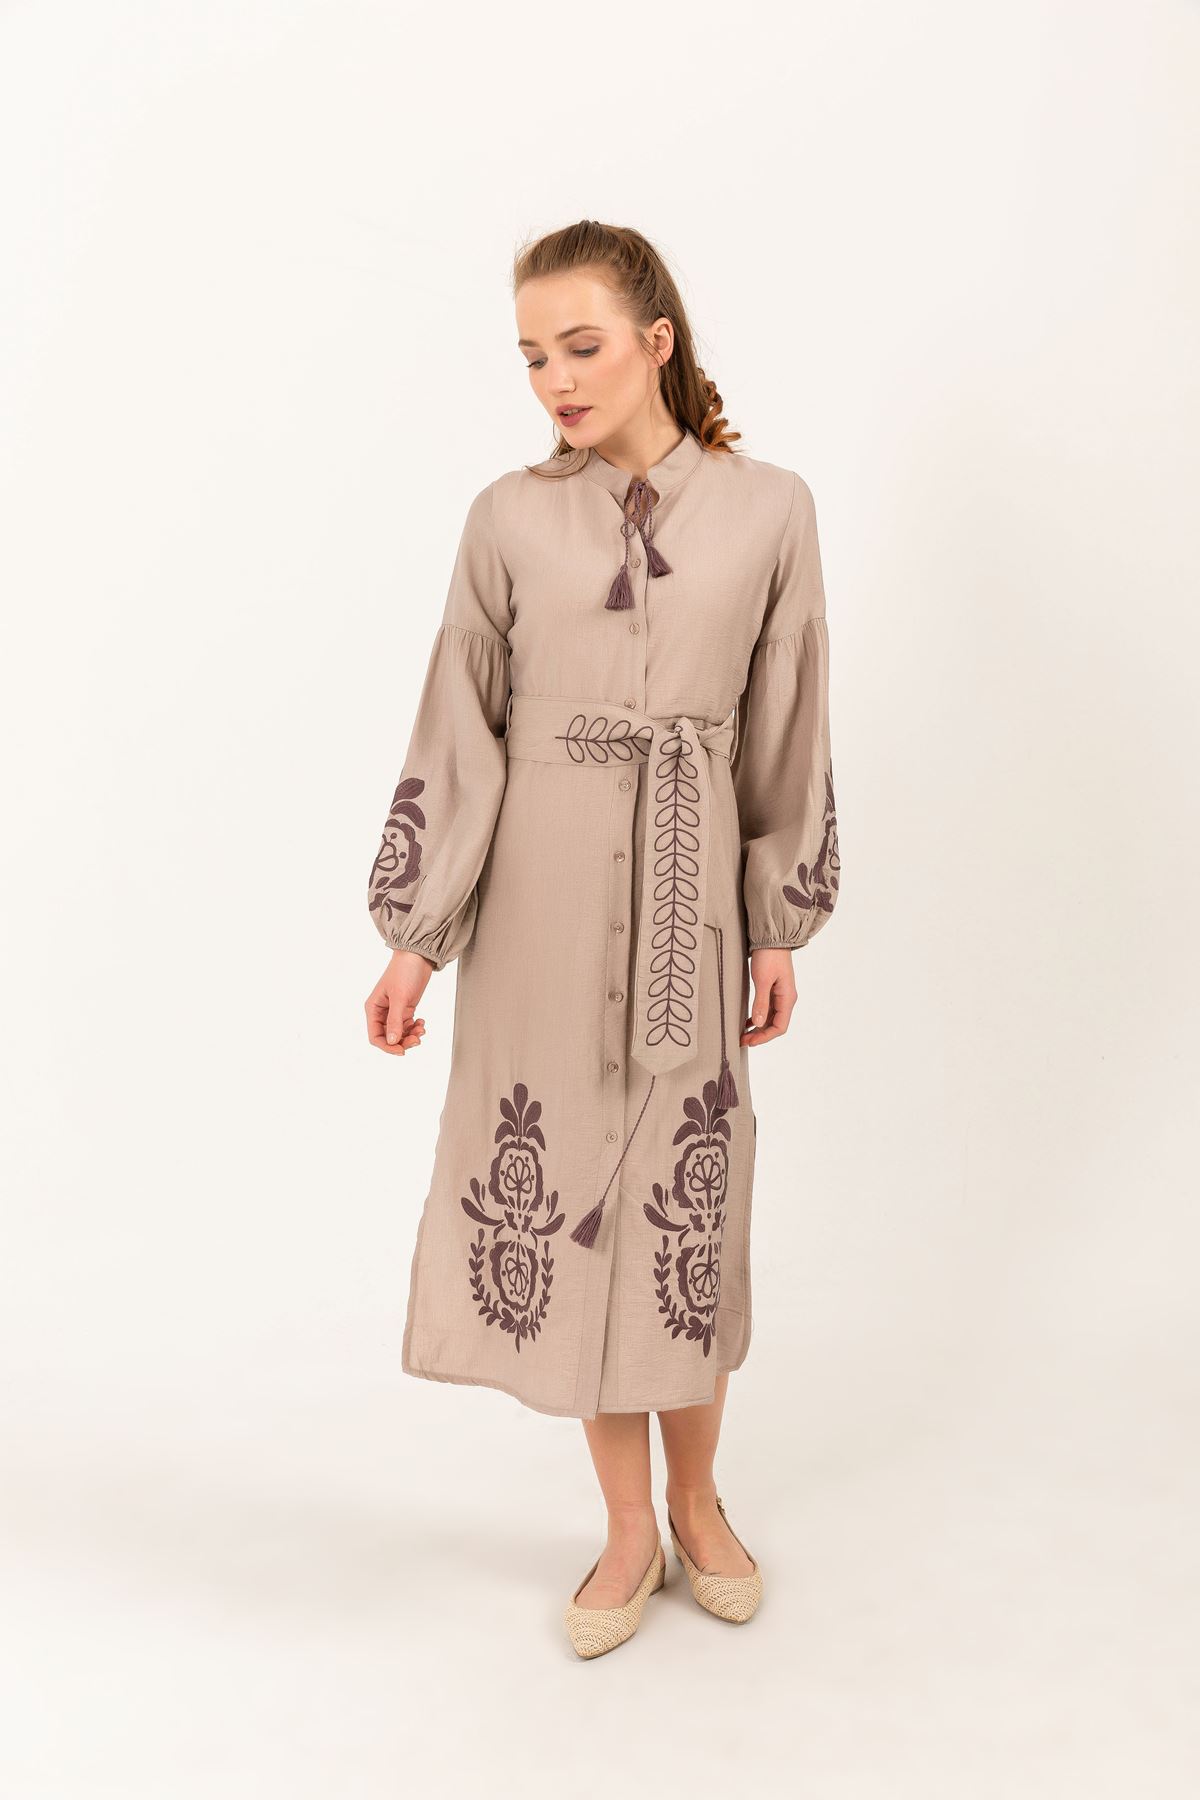 Linen Fabric Band Collar Embroidery detailed Long Midi Dress-Mink